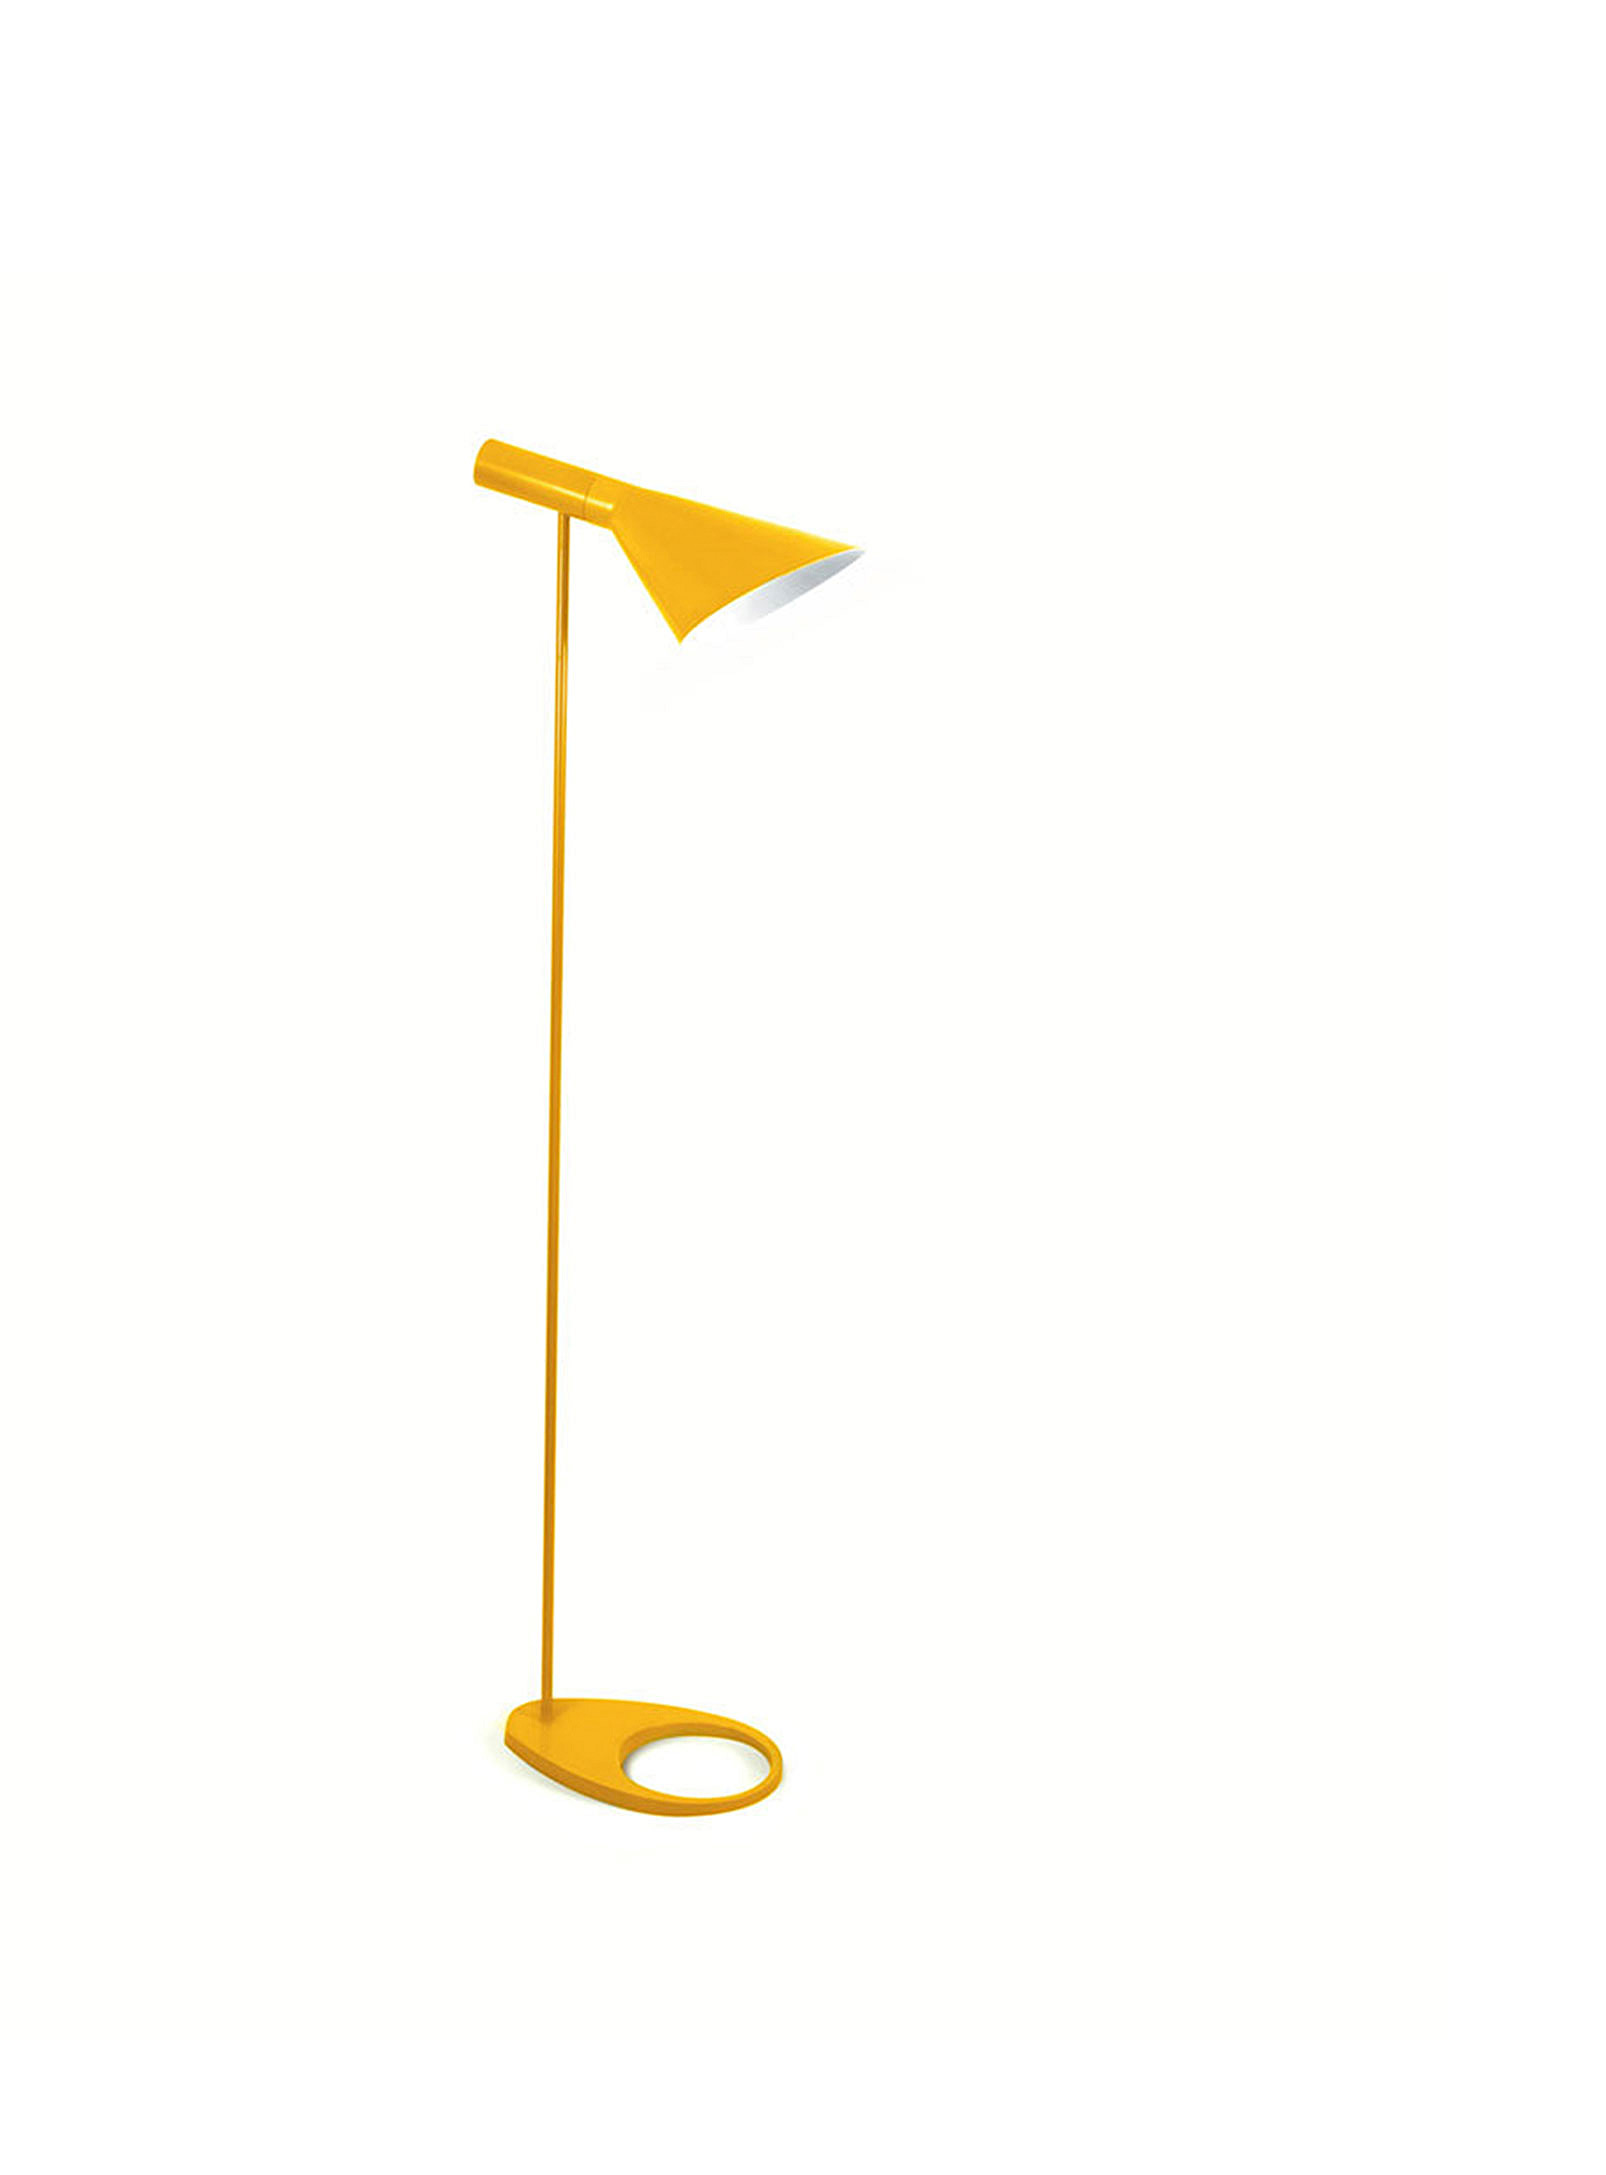 Simons Maison Asymetric Standing Lamp In Bright Yellow